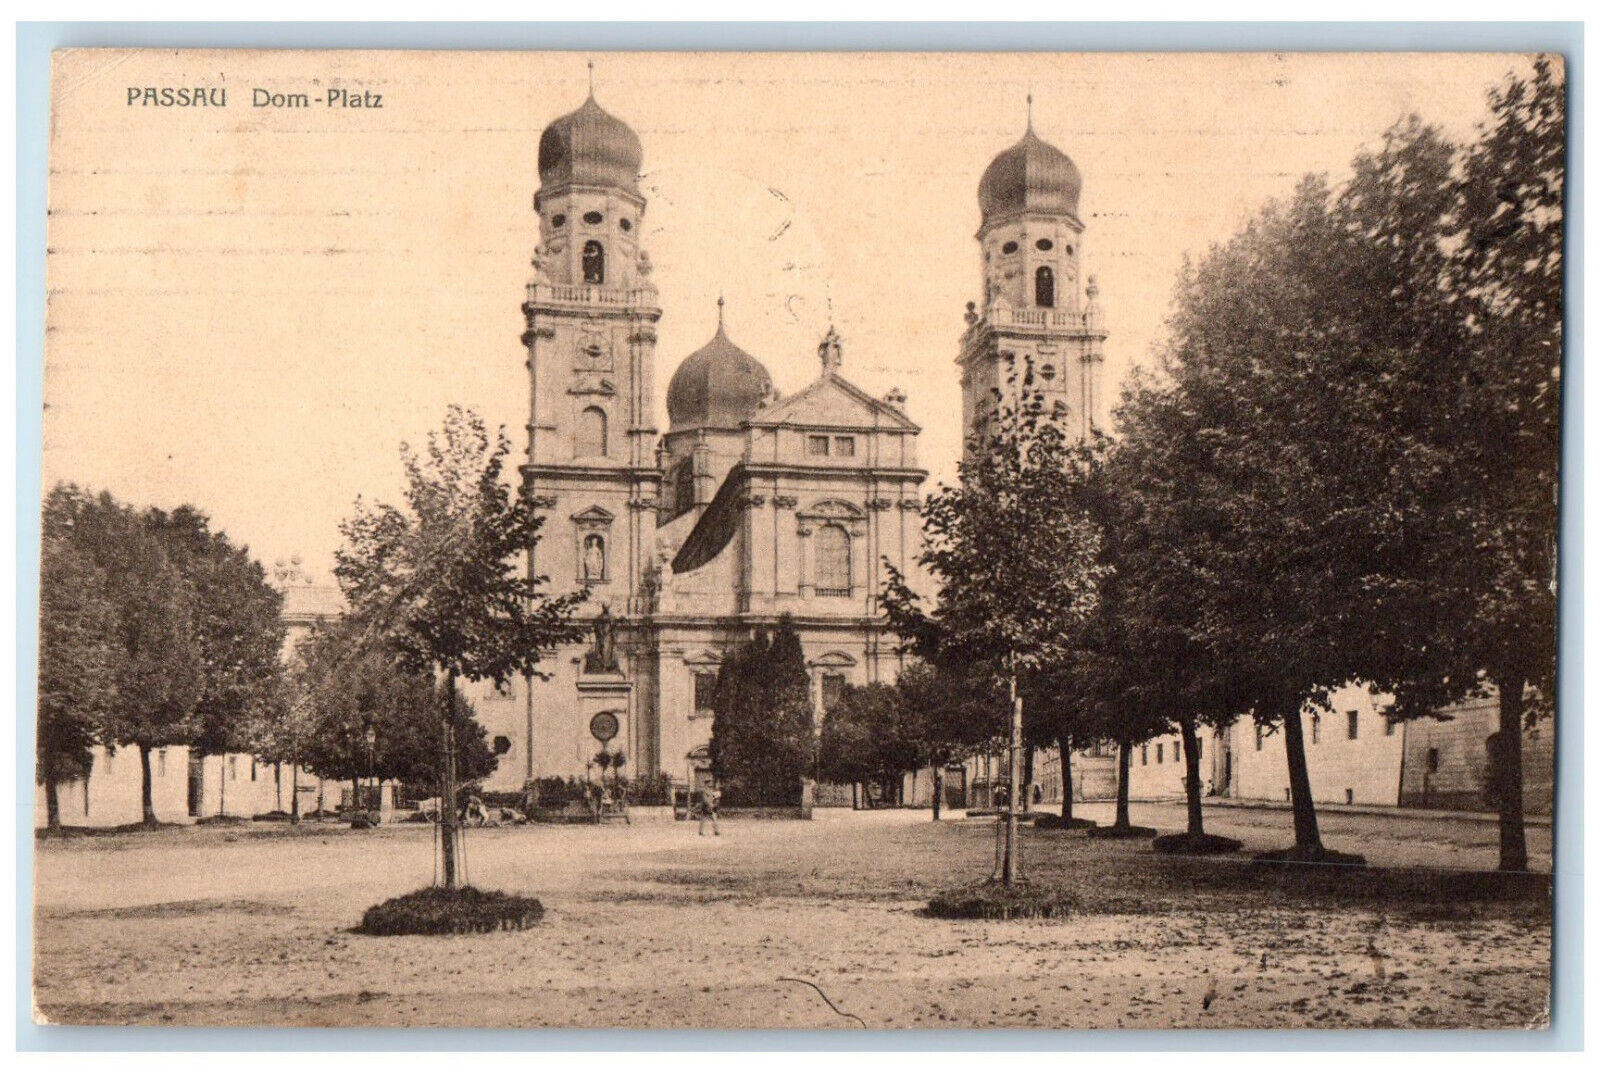 c1910 Front View of Entrance to Domplatz Passau Germany Antique Posted Postcard